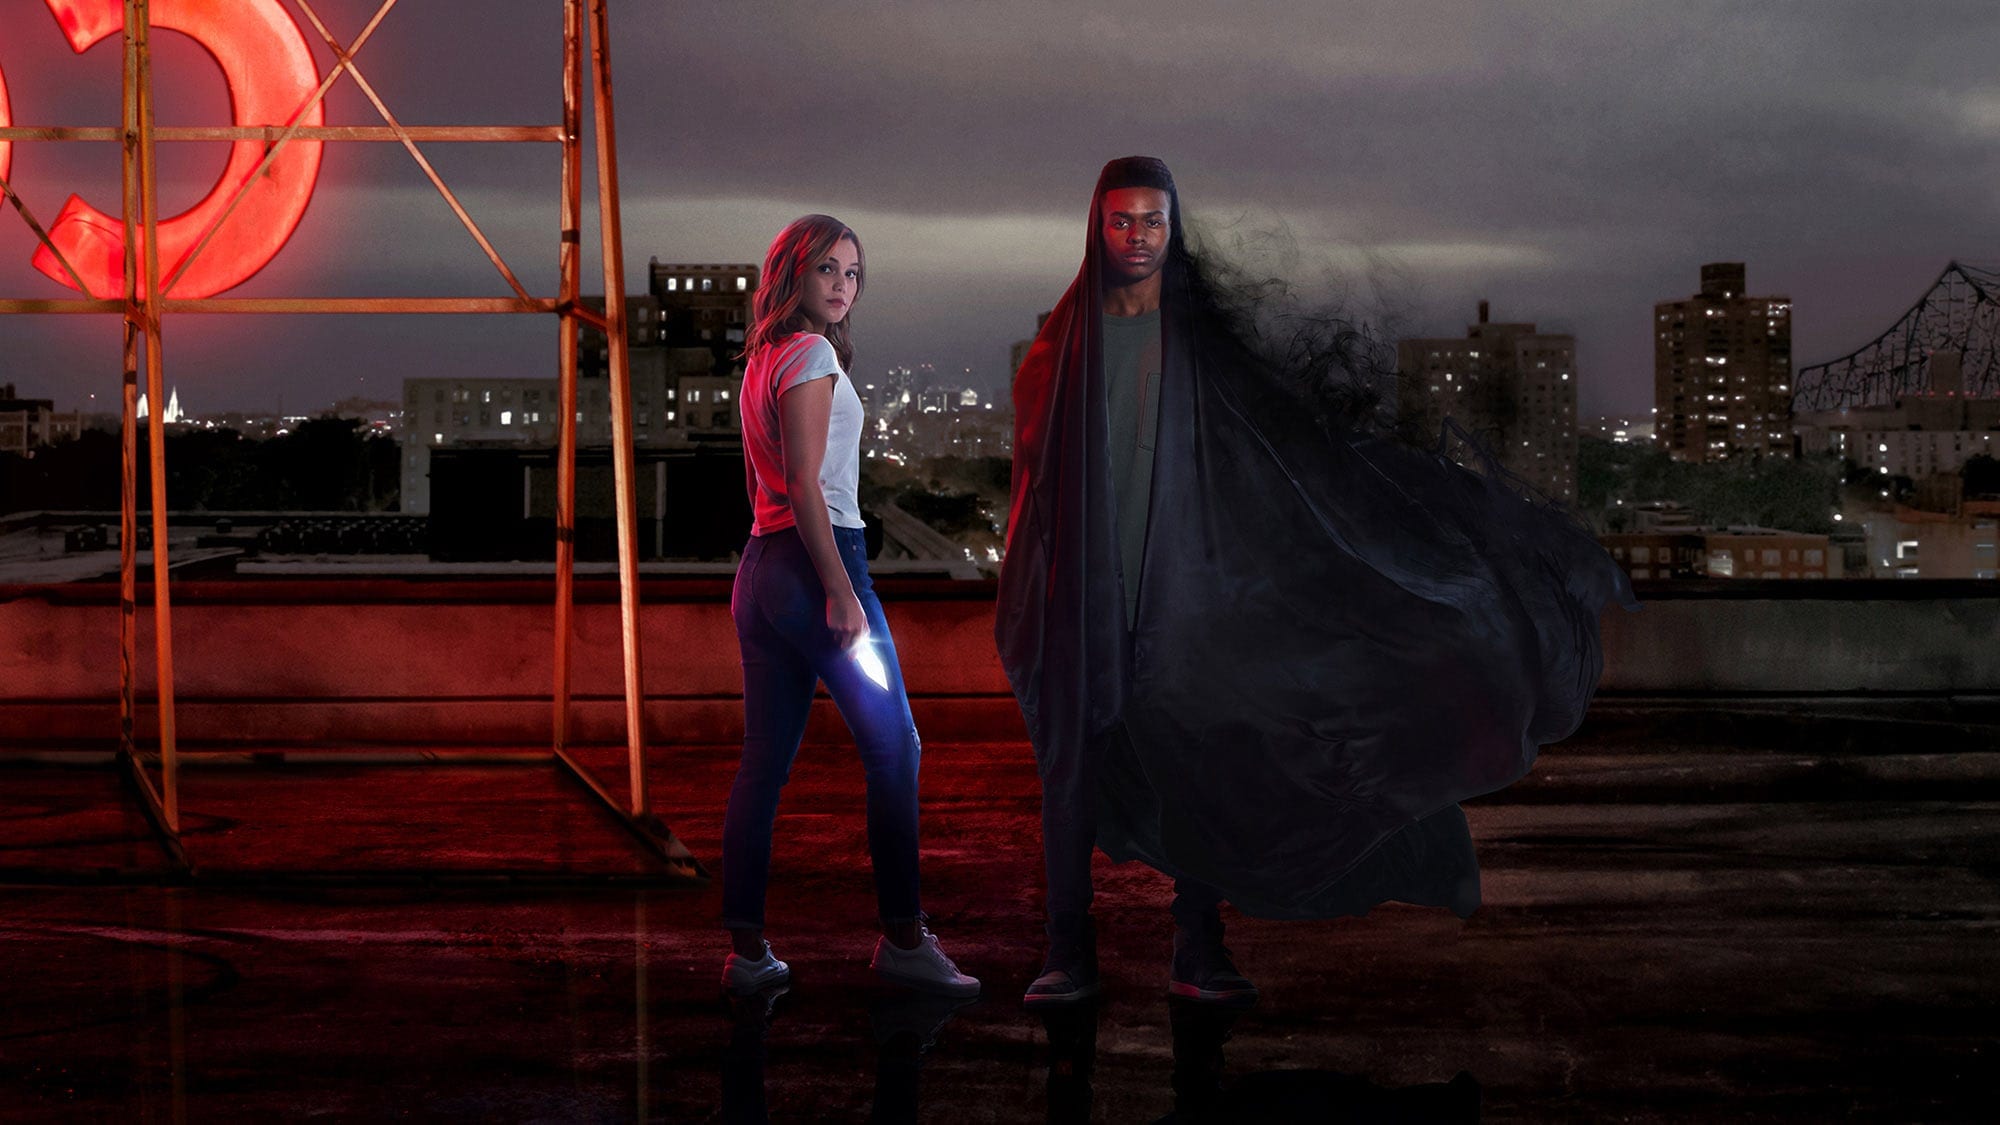 Here’s everything you need to know about Marvel's 'Cloak & Dagger' universe and how it may pertain to Freeform’s latest hit show.